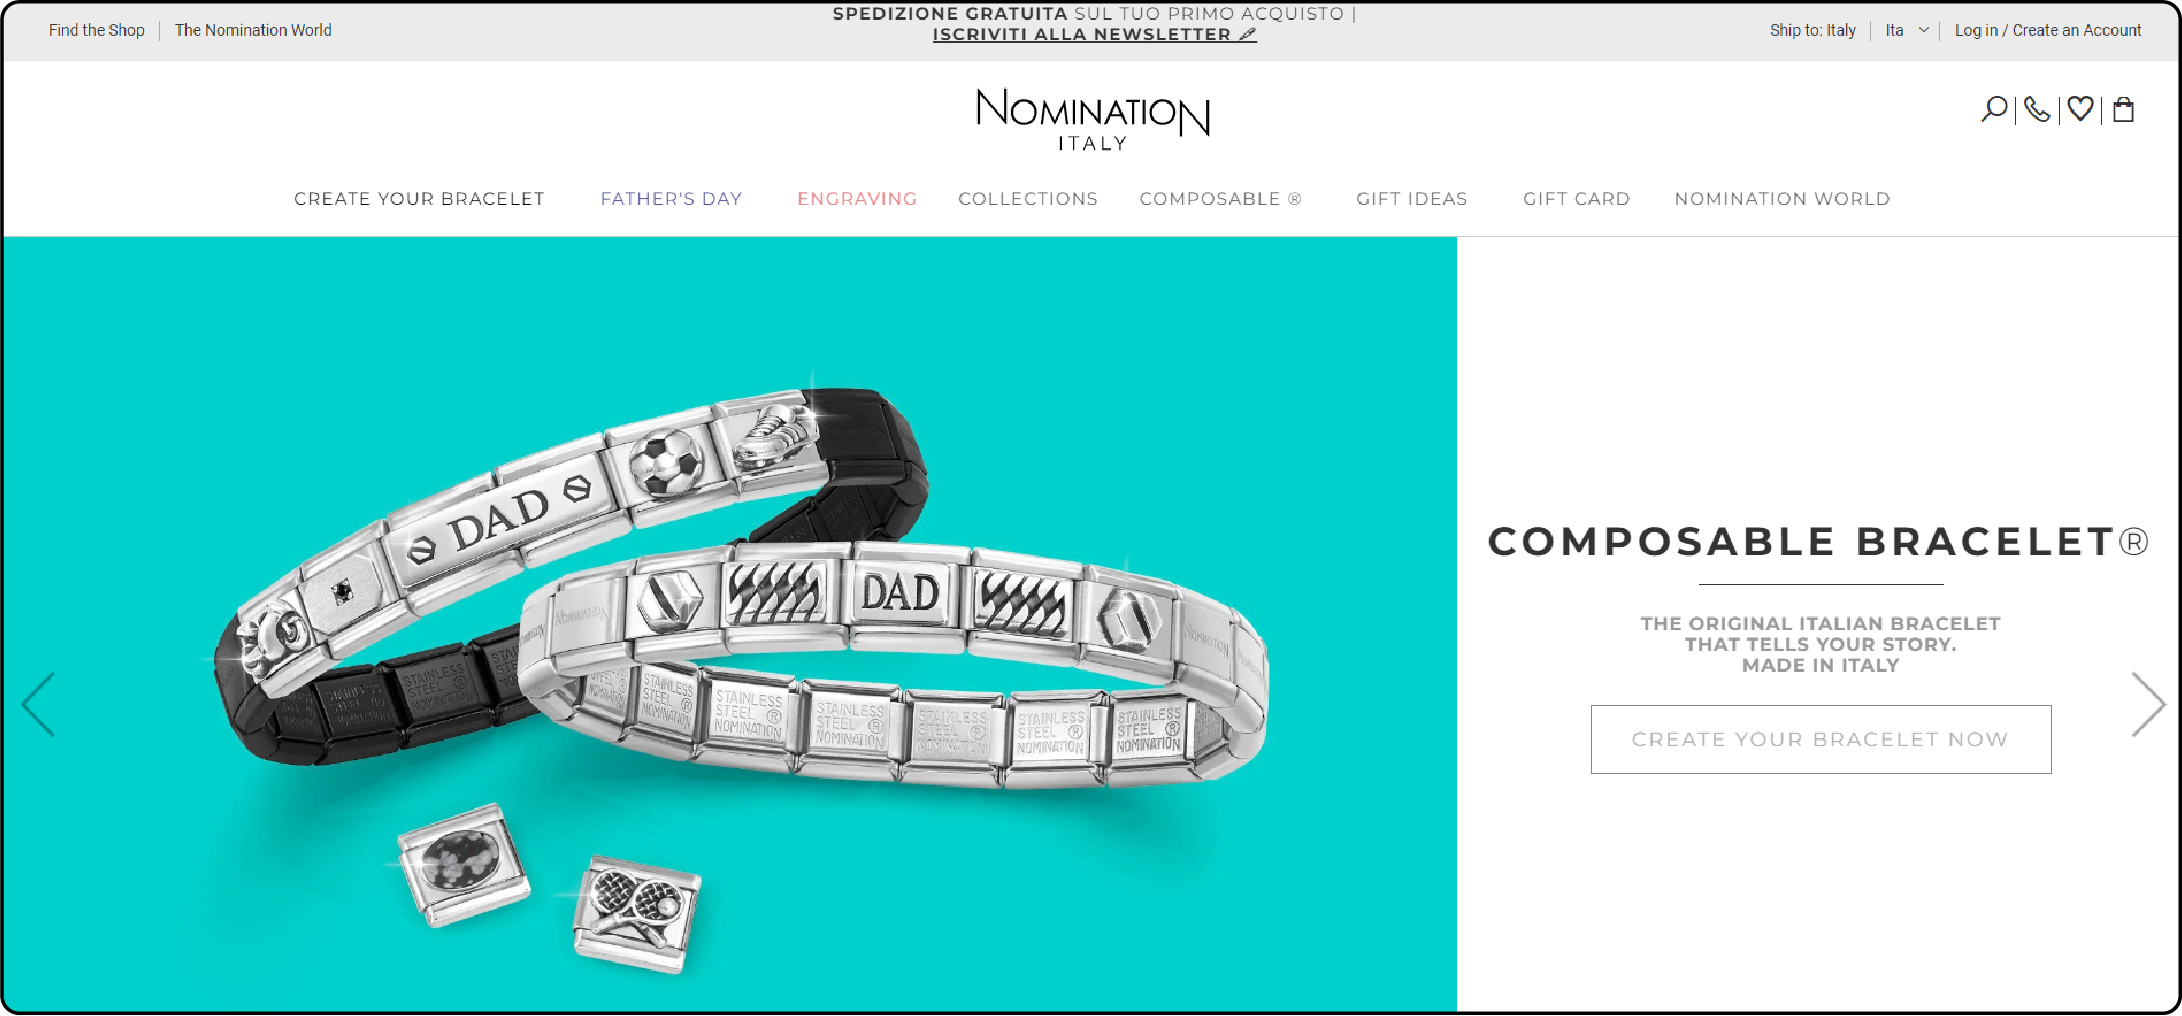 Nomination's Magento store with jewelry customization options